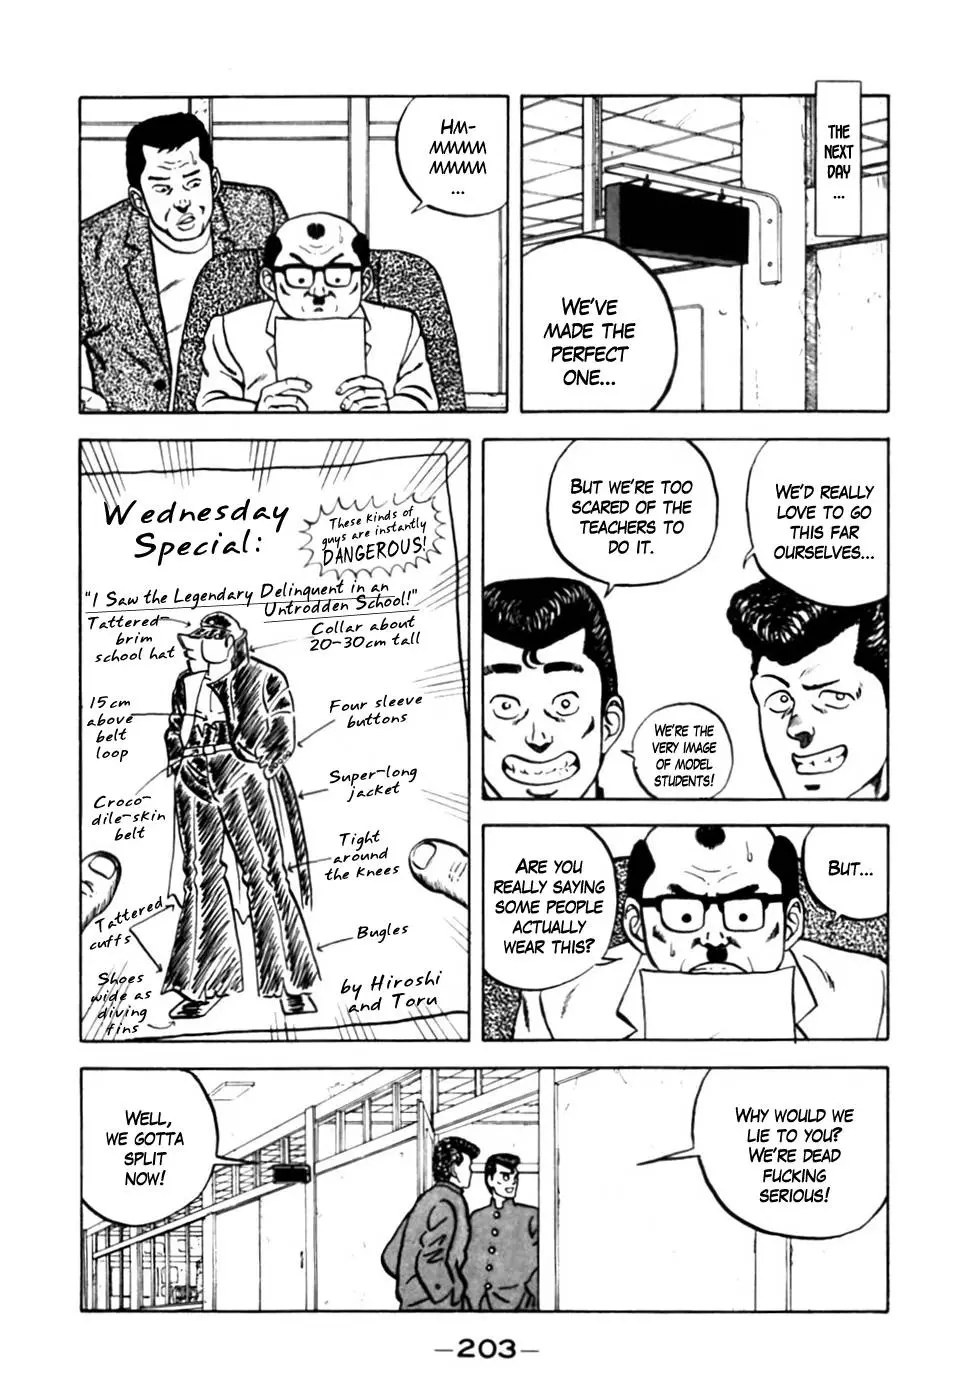 Be-Bop High School - 9 page p_00017